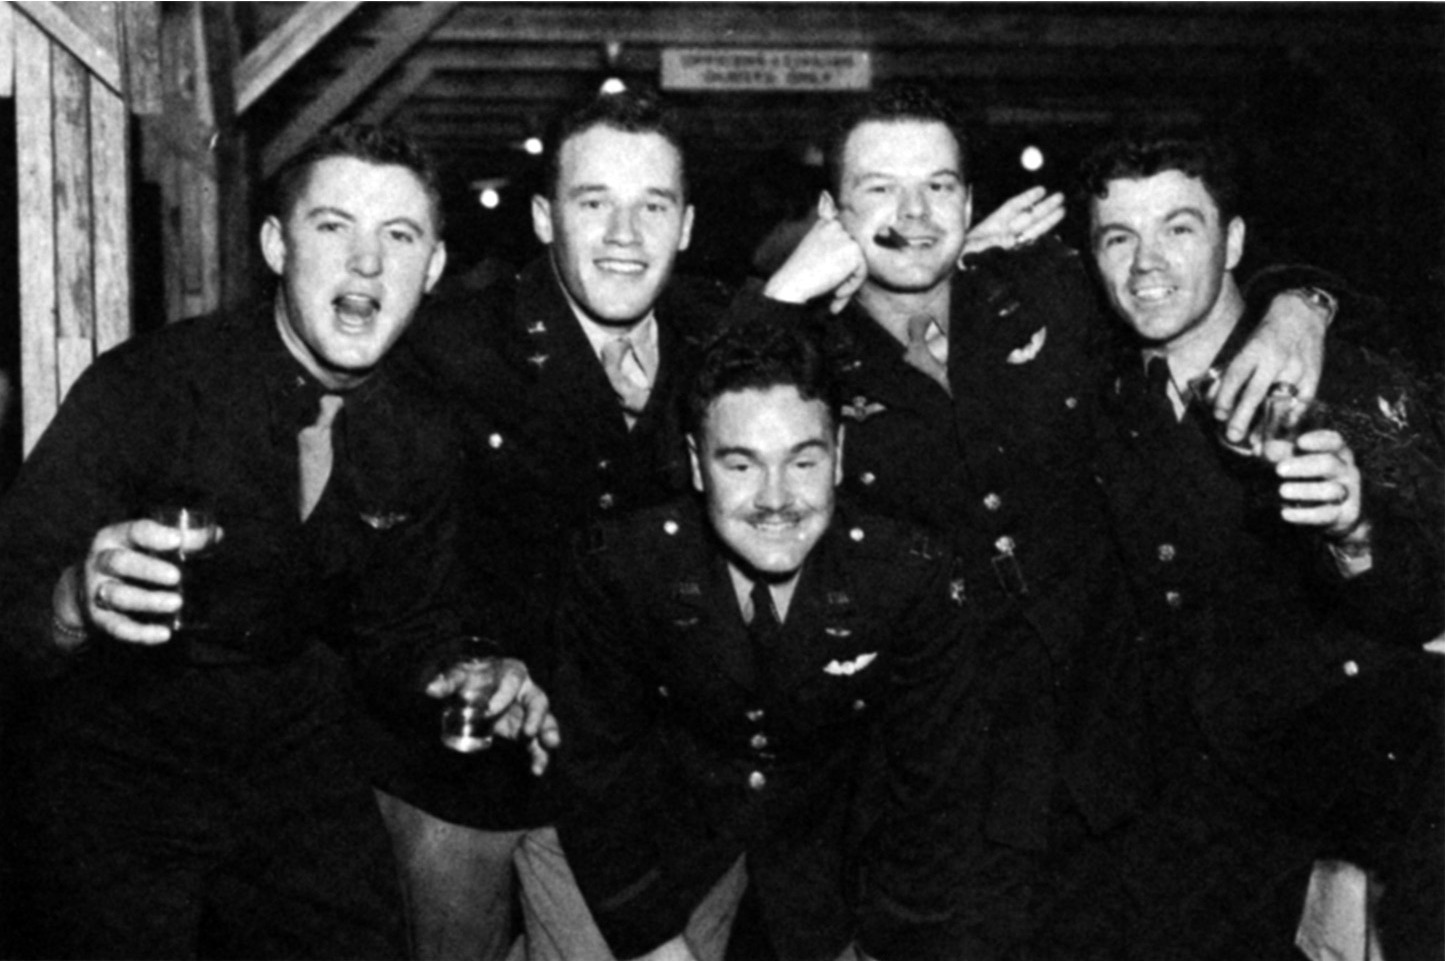 Before heading overseas in March 1944, pilots of the 406th Fighter Group enjoy a farewell party. From left, Lt. Dudolski, Lt. Hughes, Cptn L.C. Seldeon, Cptn Dunn, and Lt. Marusiack. 